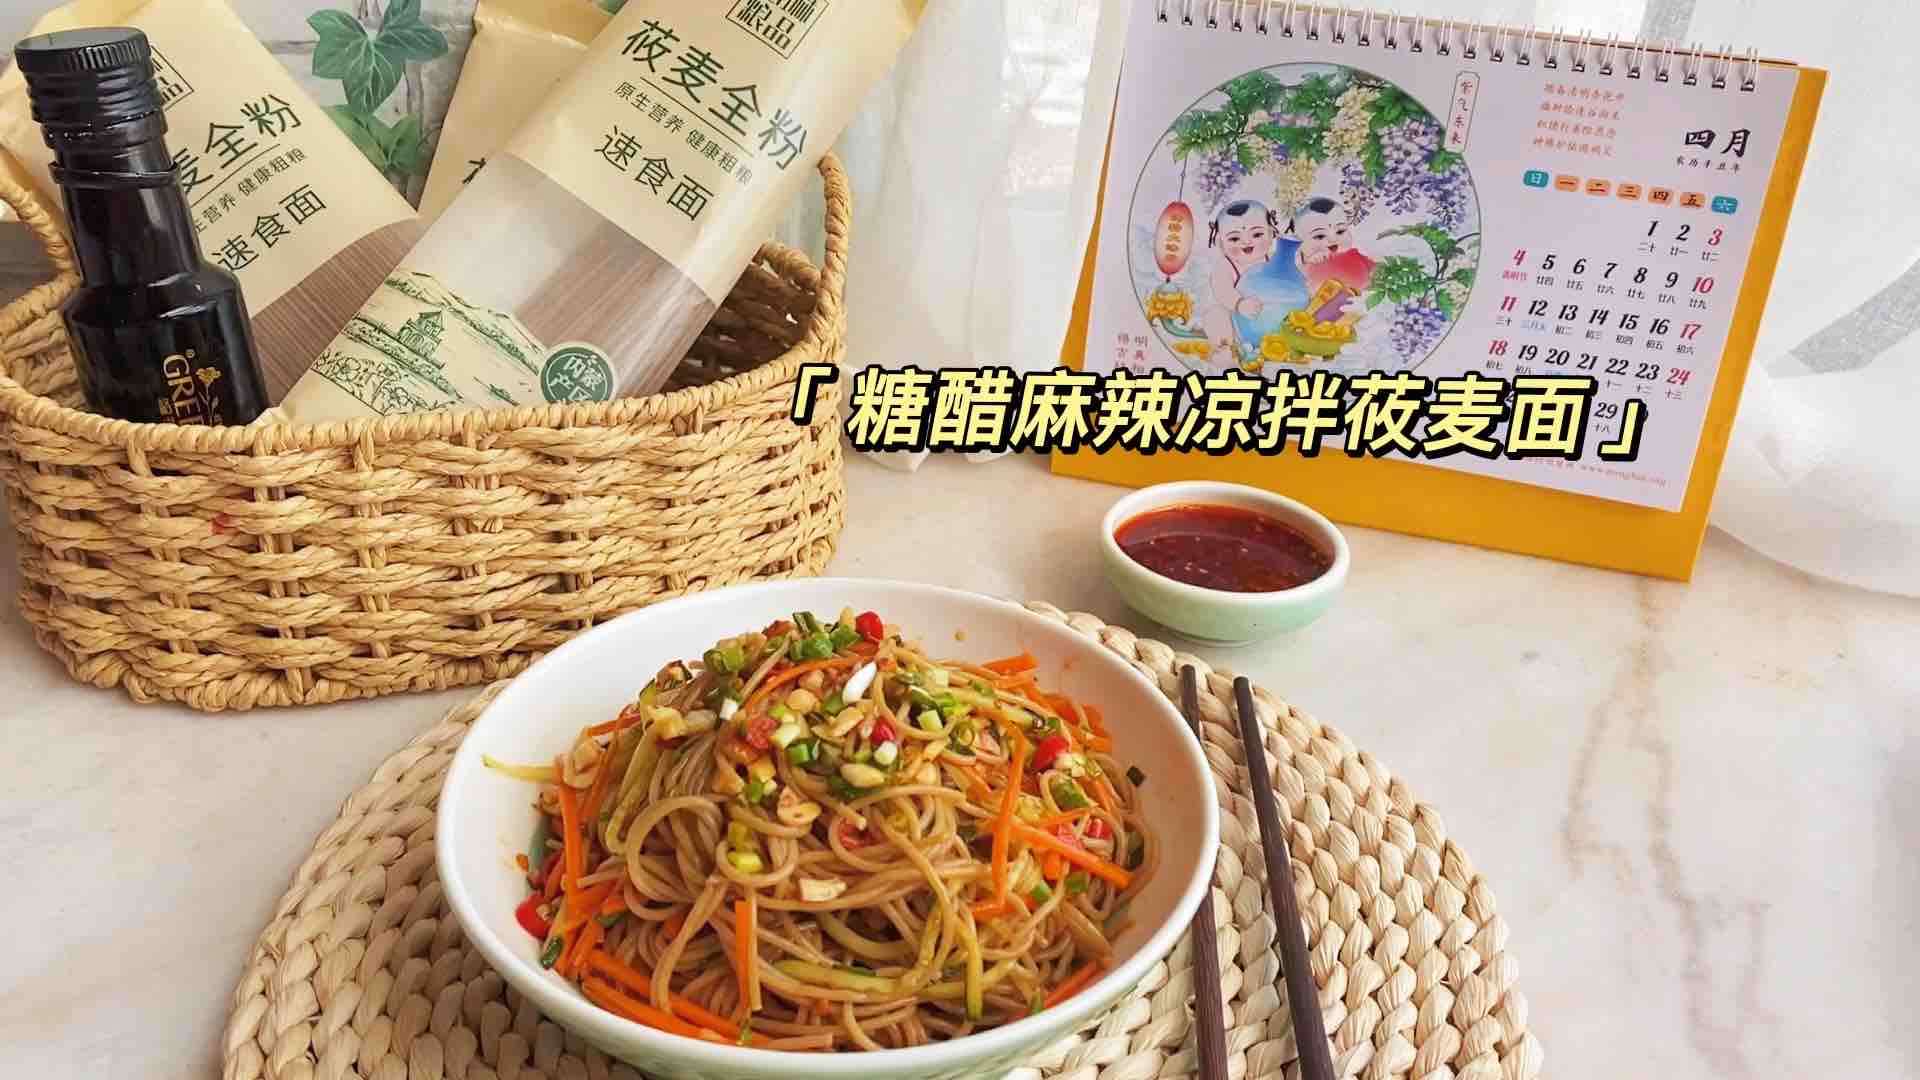 Sweet and Sour Spicy Naked Oat Noodles recipe